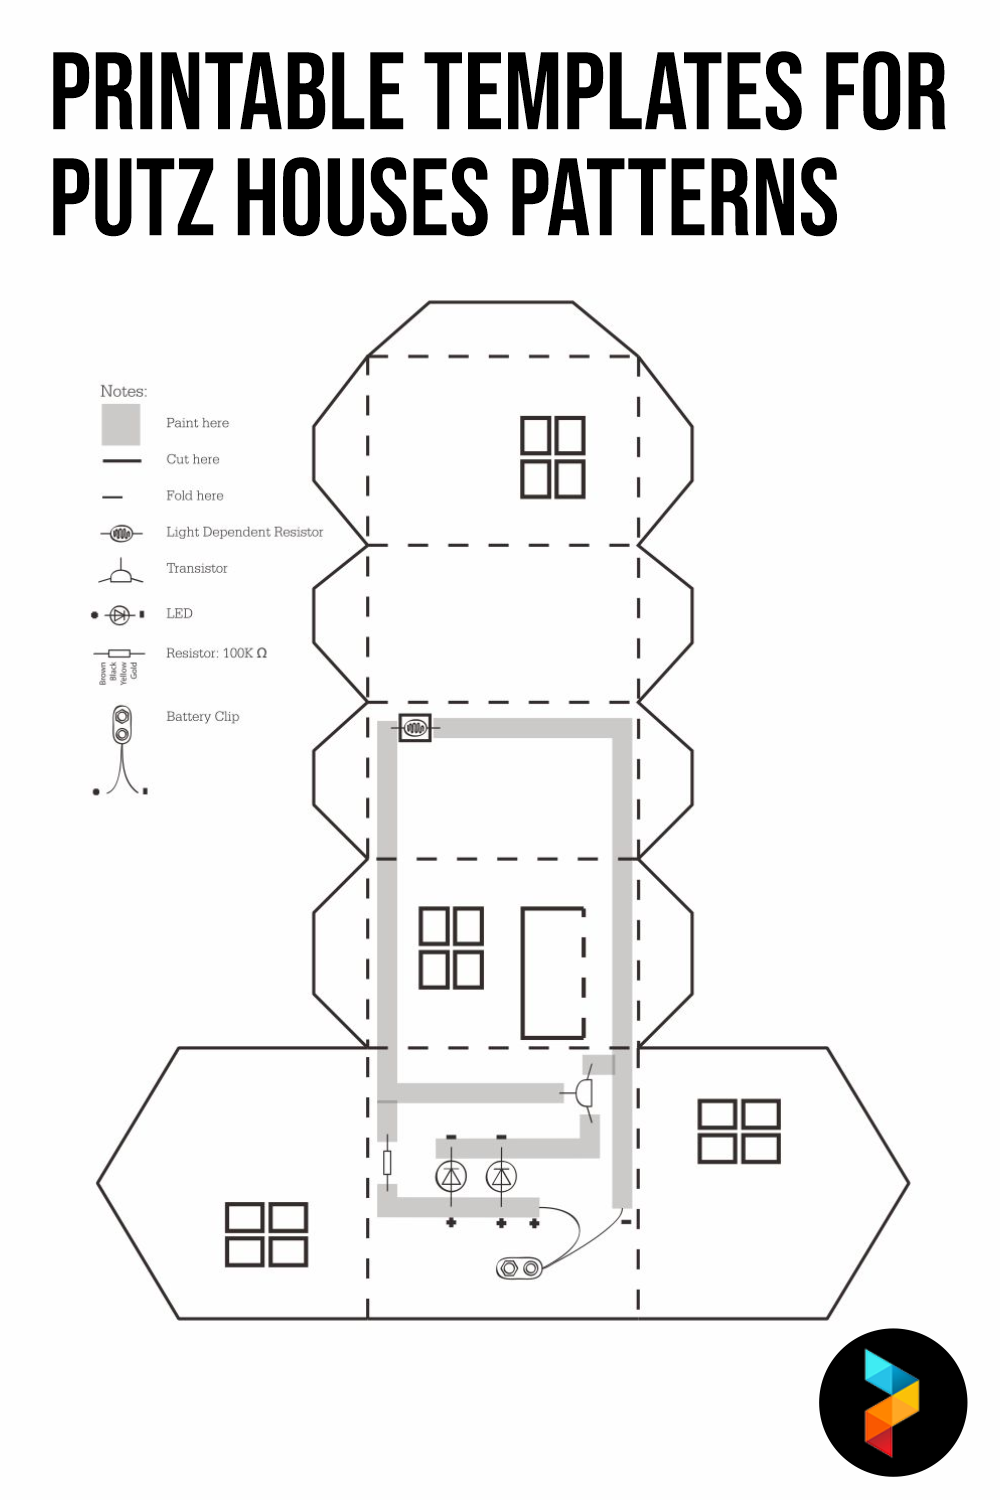 6 Best Printable Templates For Putz Houses Patterns